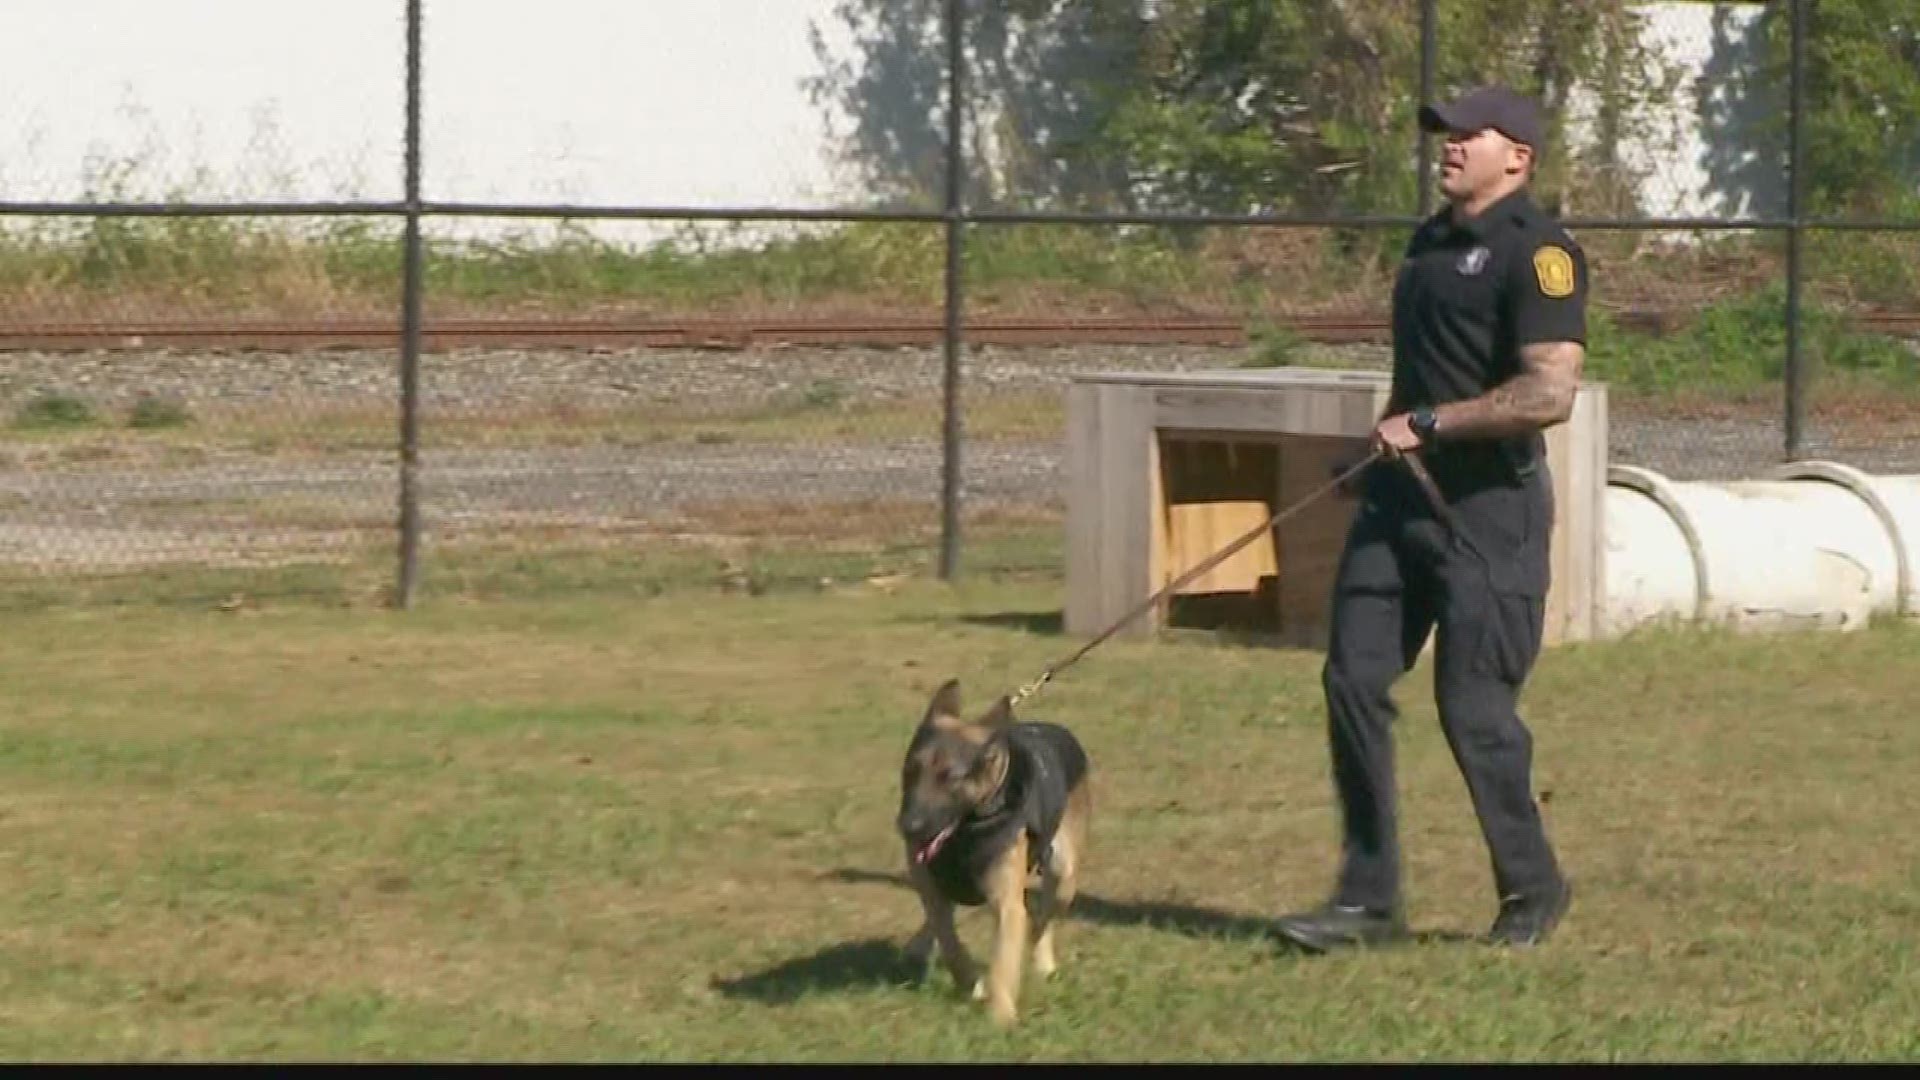 The Breeden Company has pledged $20,000 to purchase vests for Portsmouth Police's K-9s.